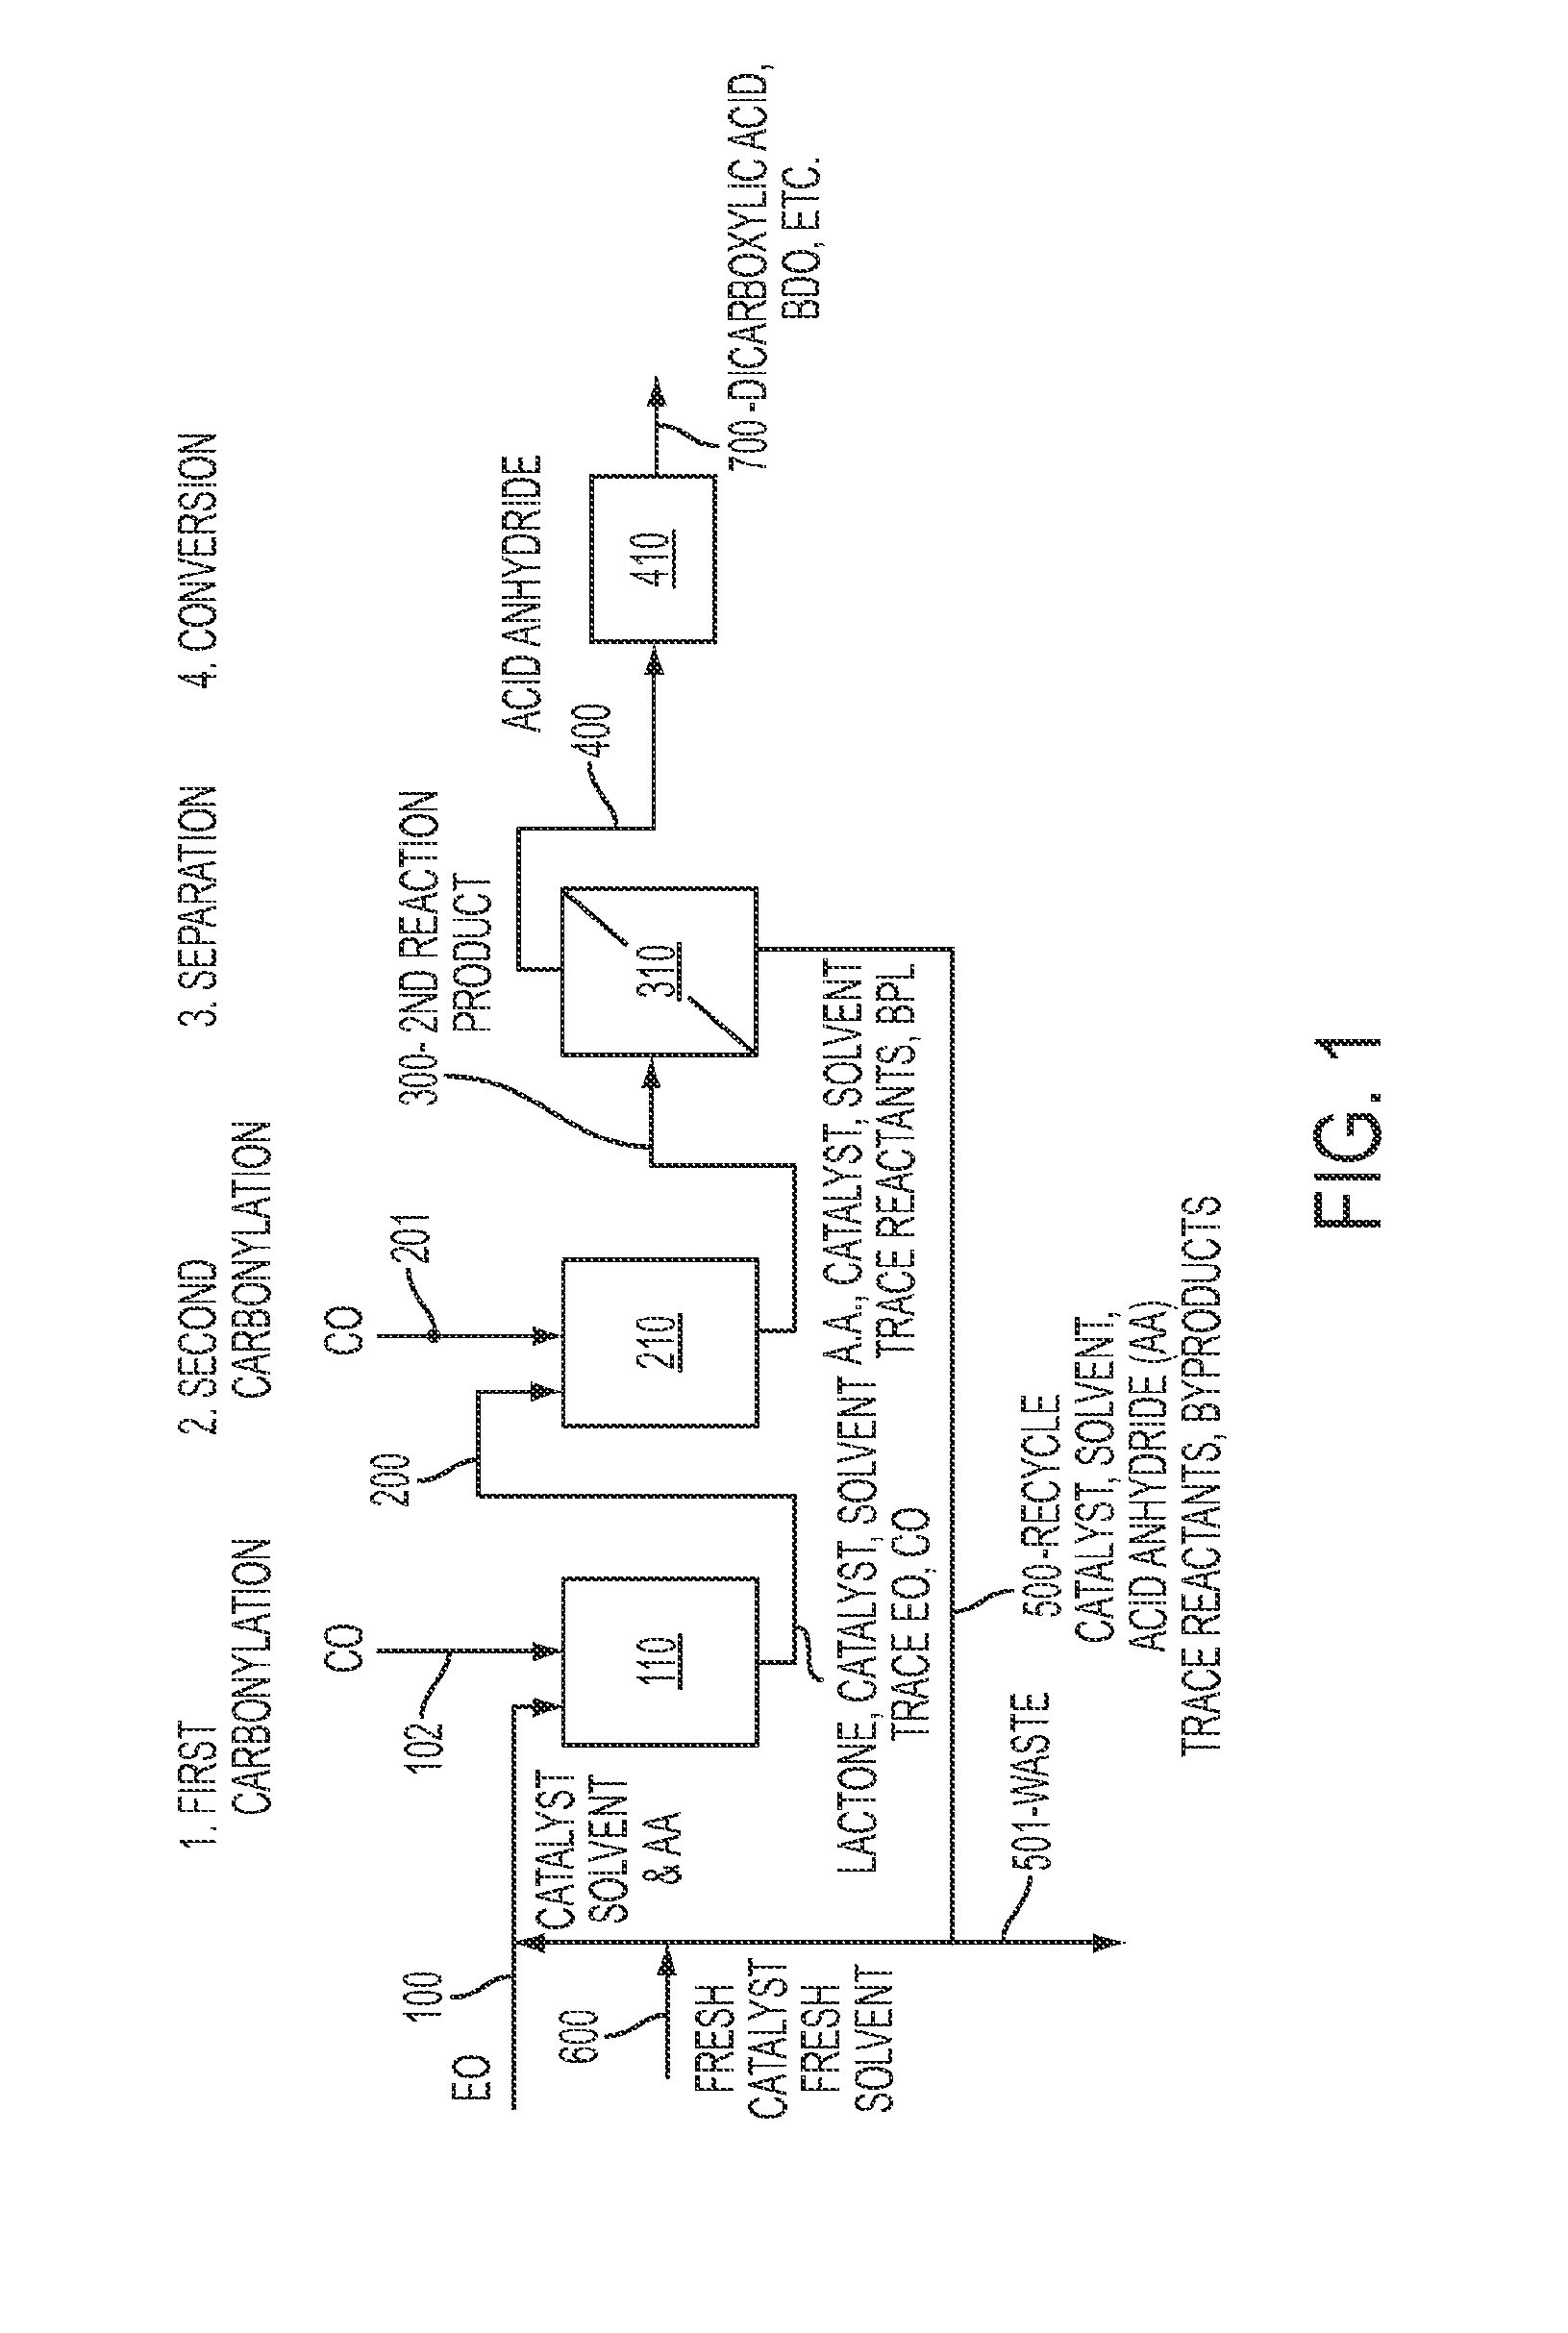 Process for the production of acid anhydrides from epoxides